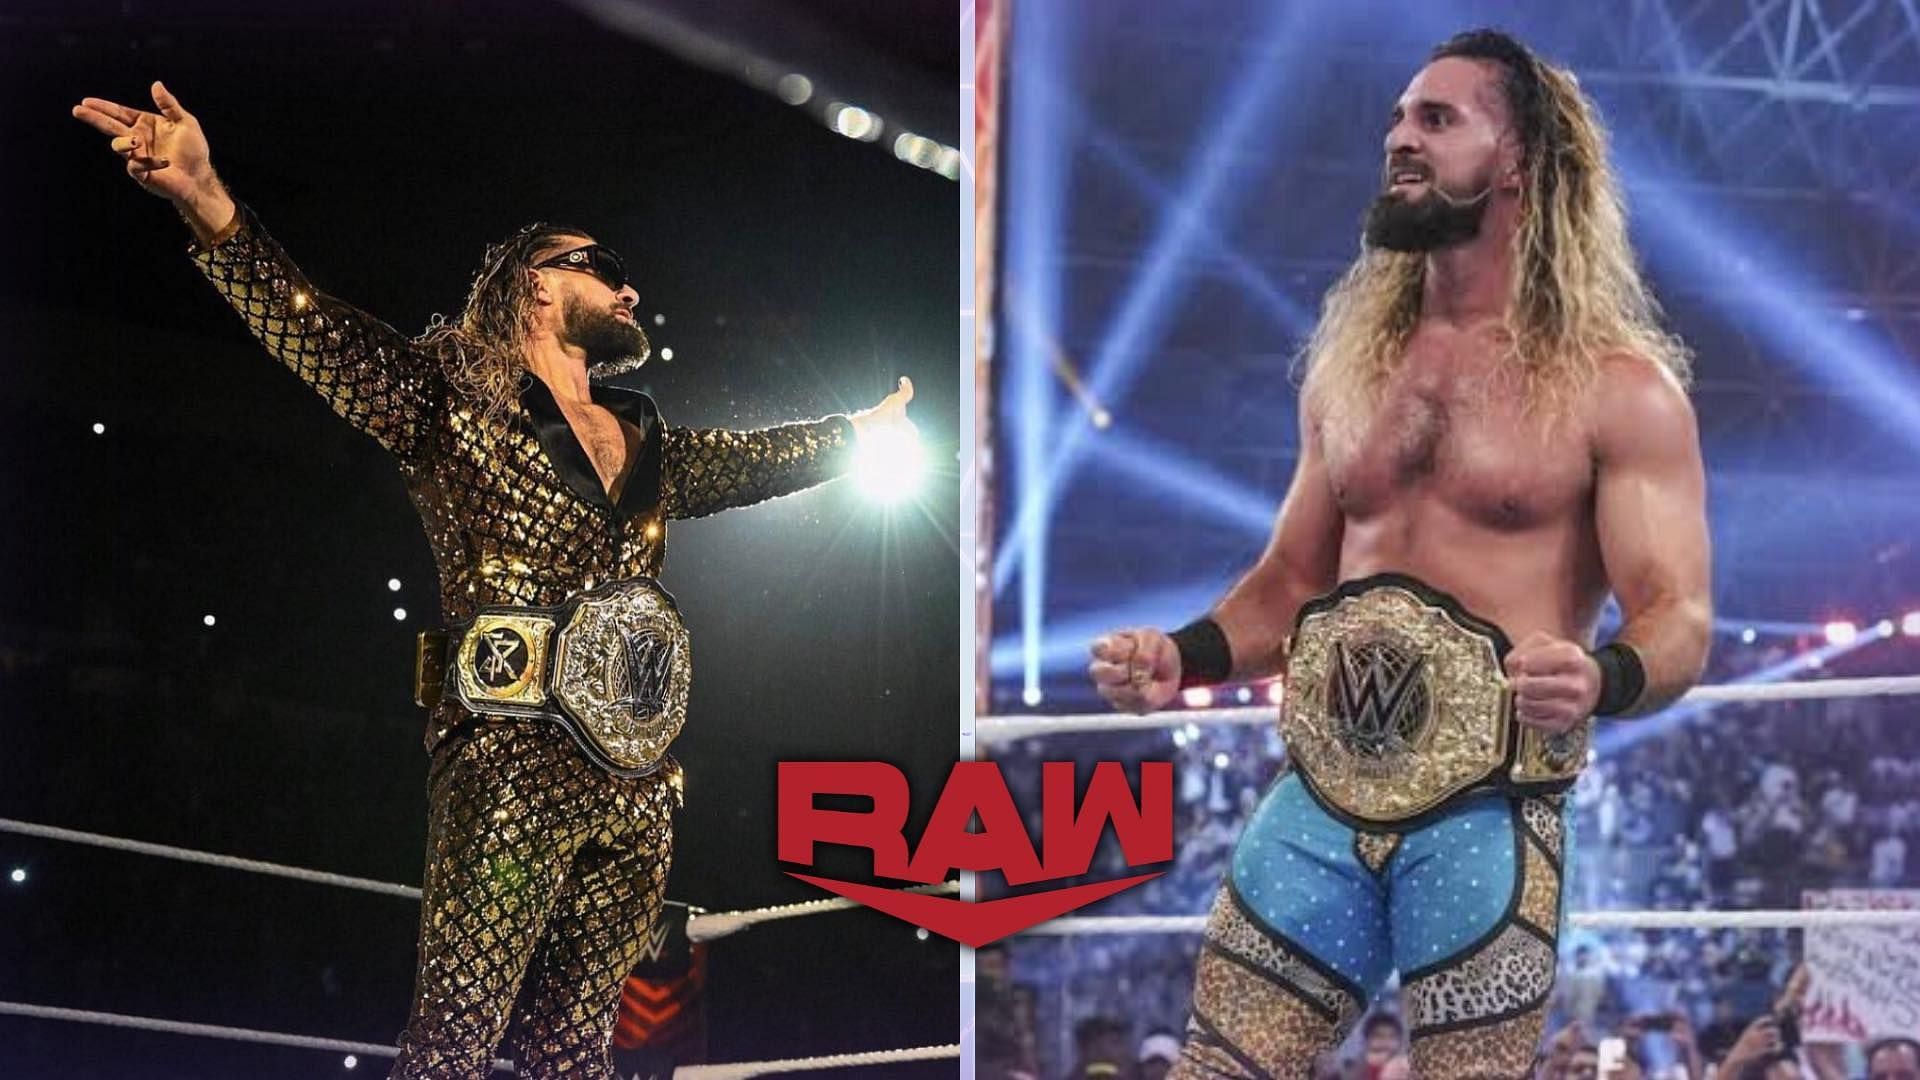 So far, Seth Rollins has been a fighting Champion.